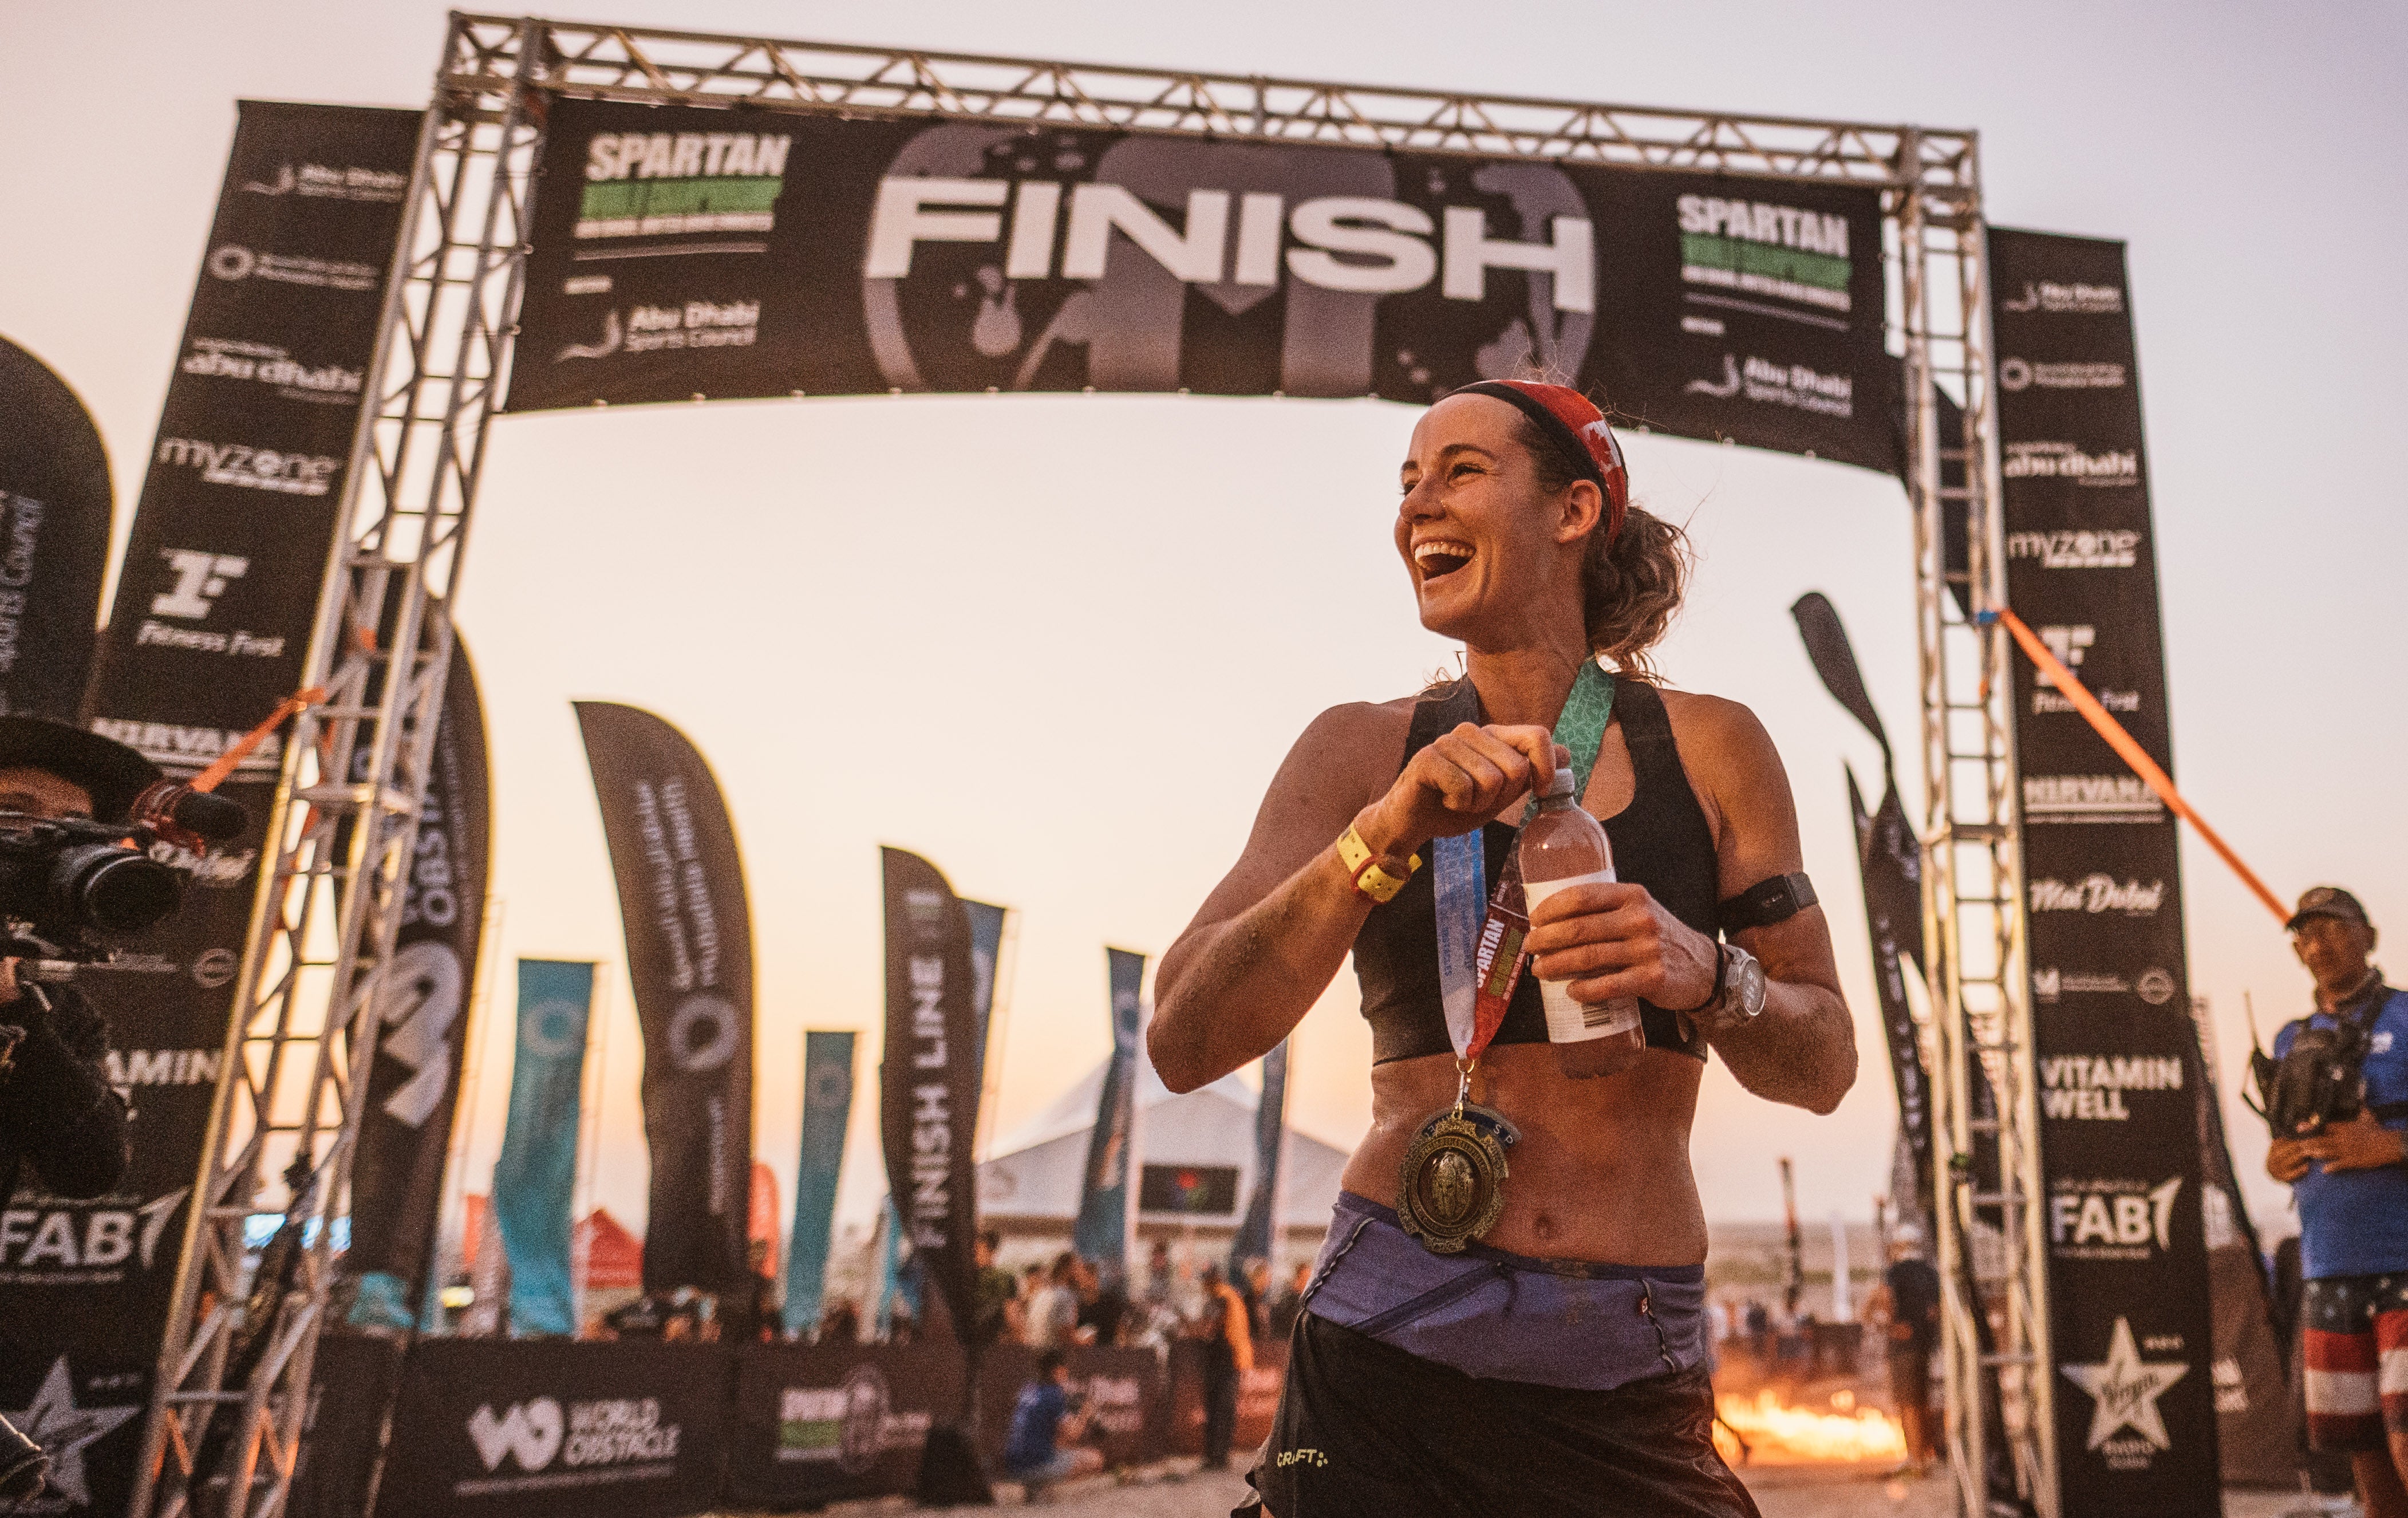 Winner Lindsay Webster crosses the finish line of the 2022 Spartan World Championship in Abu Dhabi